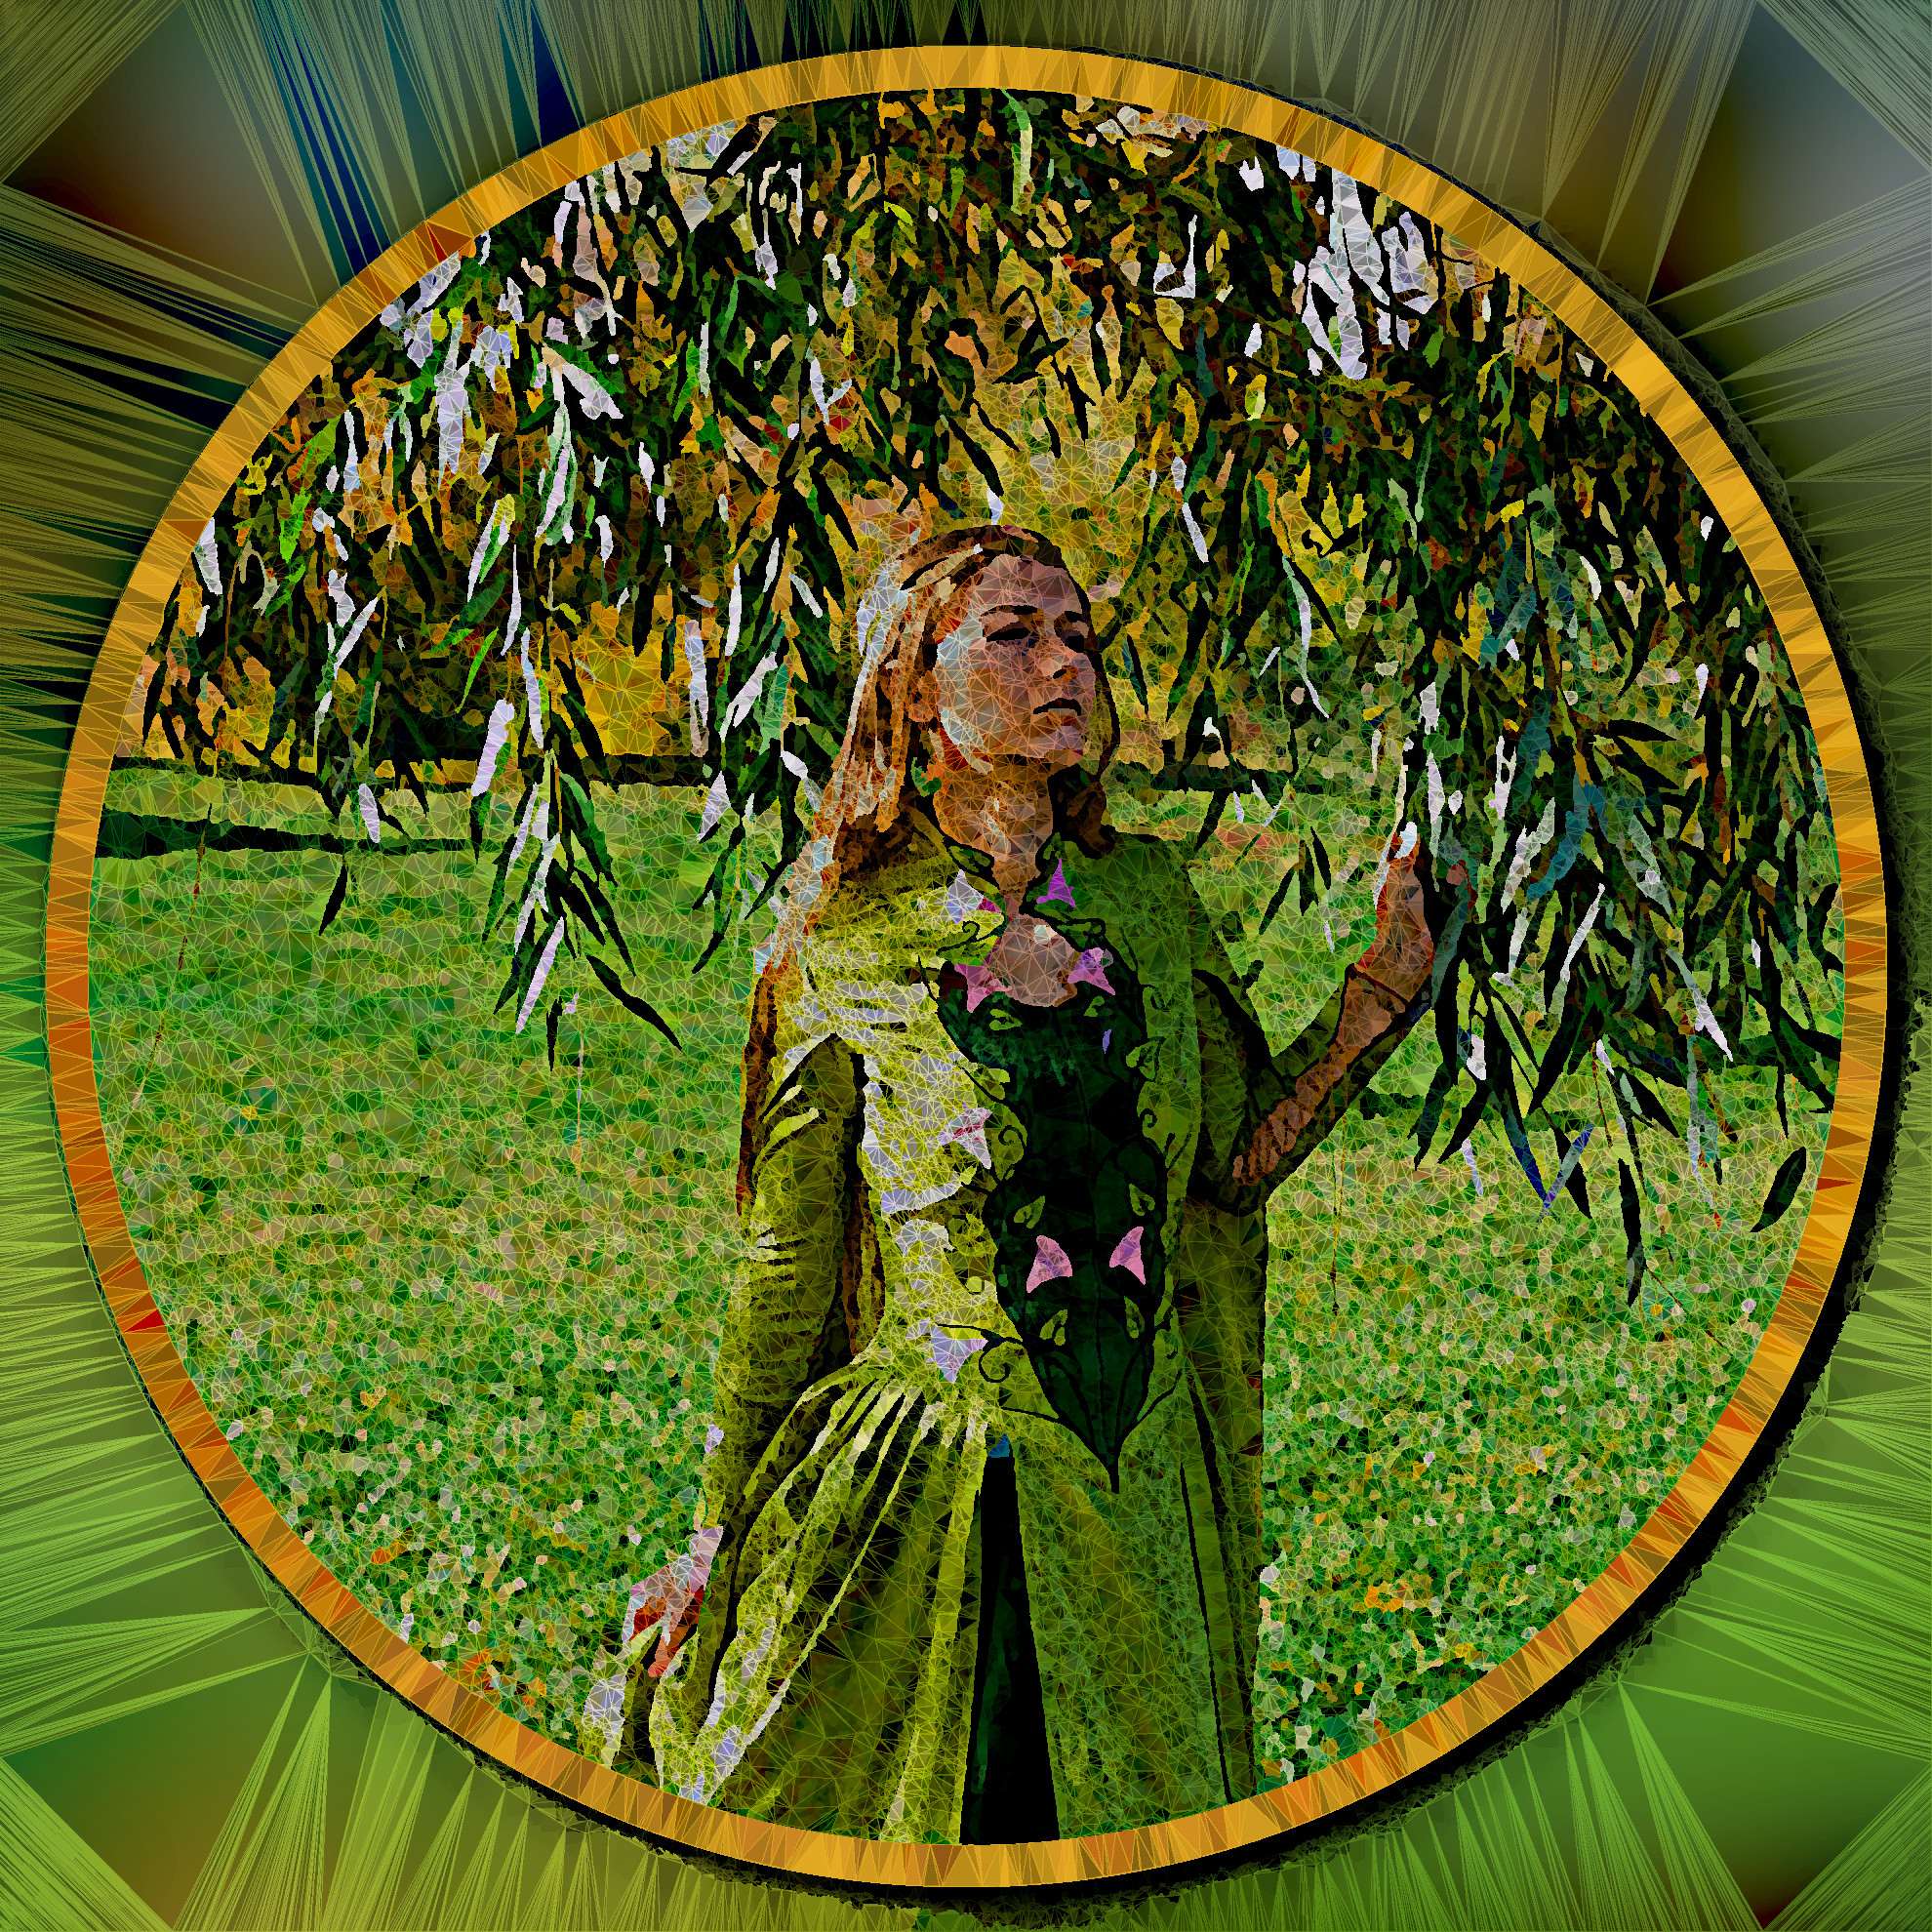 2023-05-30 13-52-51costume__young_leaves__by_aquilina108_dbytjff-fullview_portrait with a framed Artistic effect, style PolygonizeDelauney.jpg